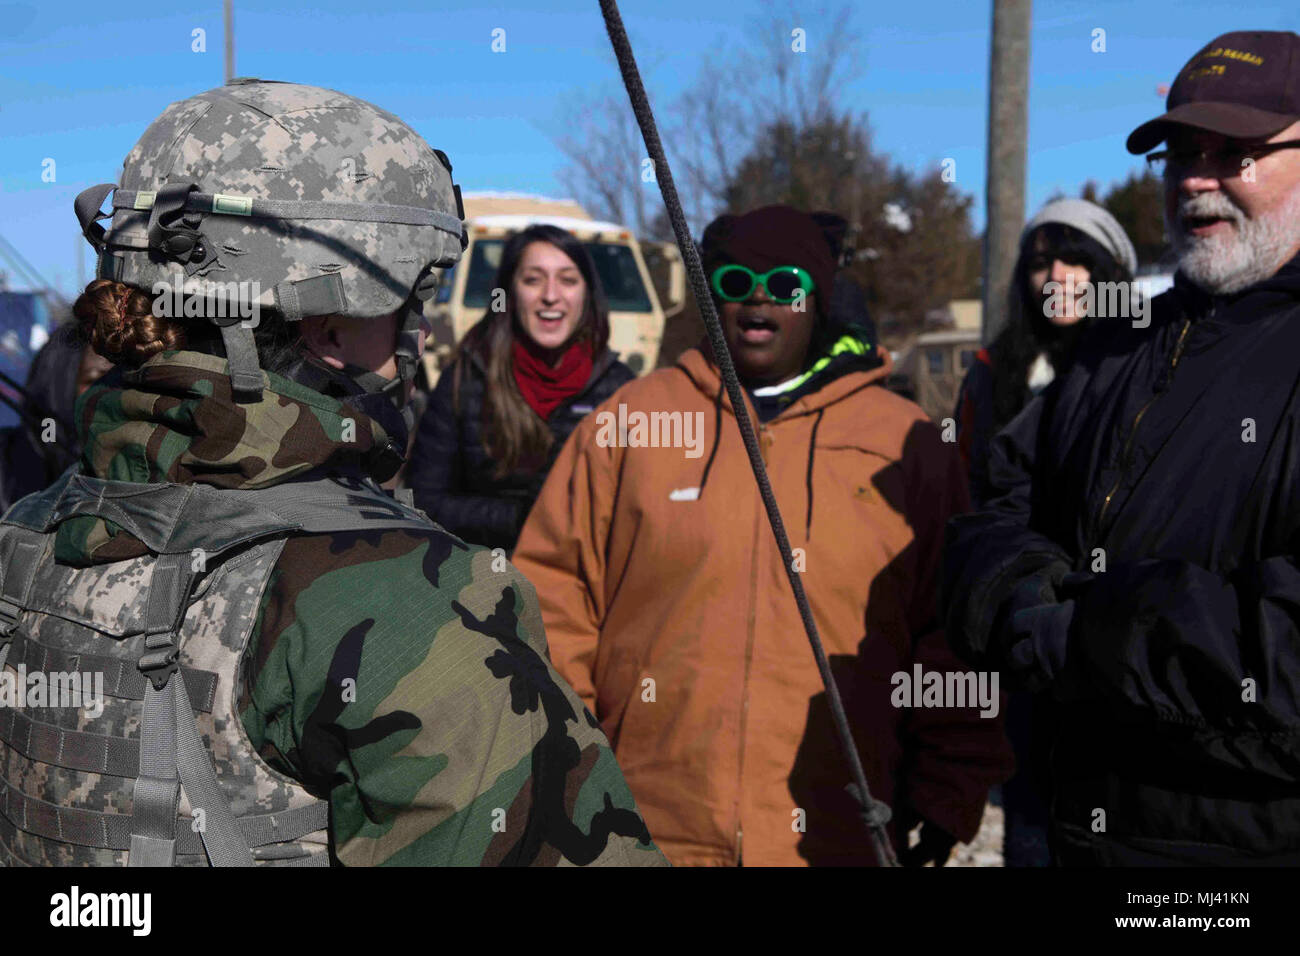 U.S. Army Reserve 1st Sgt. Lauren Herrick, of the 364th Civil Affairs Brigade, speaks with civilians acting as local nationals as a part of a civil affairs training exercise during the Combat Support Training Exercise (CSTX) at Fort Knox, Kentucky, March 22, 2018. CSTX 2018 ensures Army reserve units are trained and ready to deploy on short notice and bring capable, combat ready, and lethal firepower in support of the Army and our joint partners anywhere in the world. (U.S. Army Image collection celebrating the bravery dedication commitment and sacrifice of U.S. Armed Forces and civilian perso Stock Photo